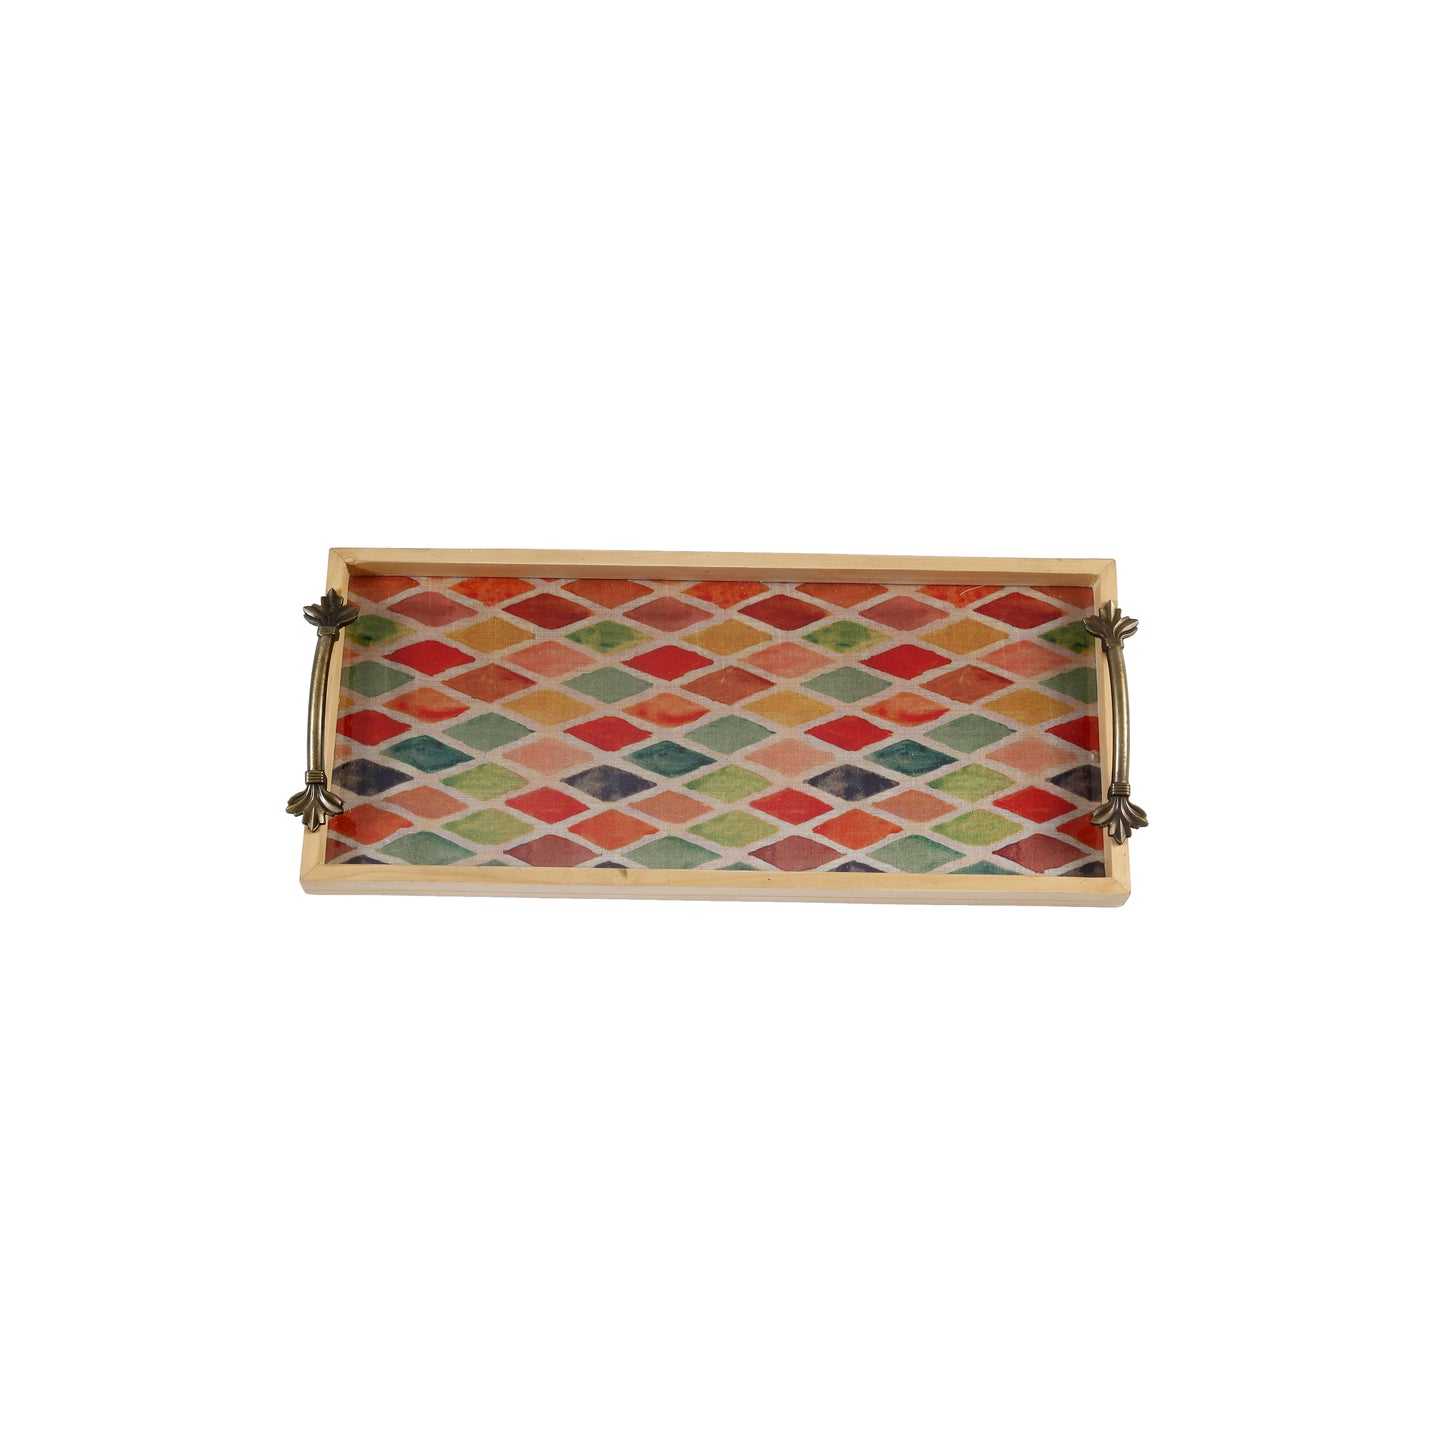 A Tiny Mistake Multicoloured Geometric Pattern Pine Tray with Handle Serving Pine Wood Tray